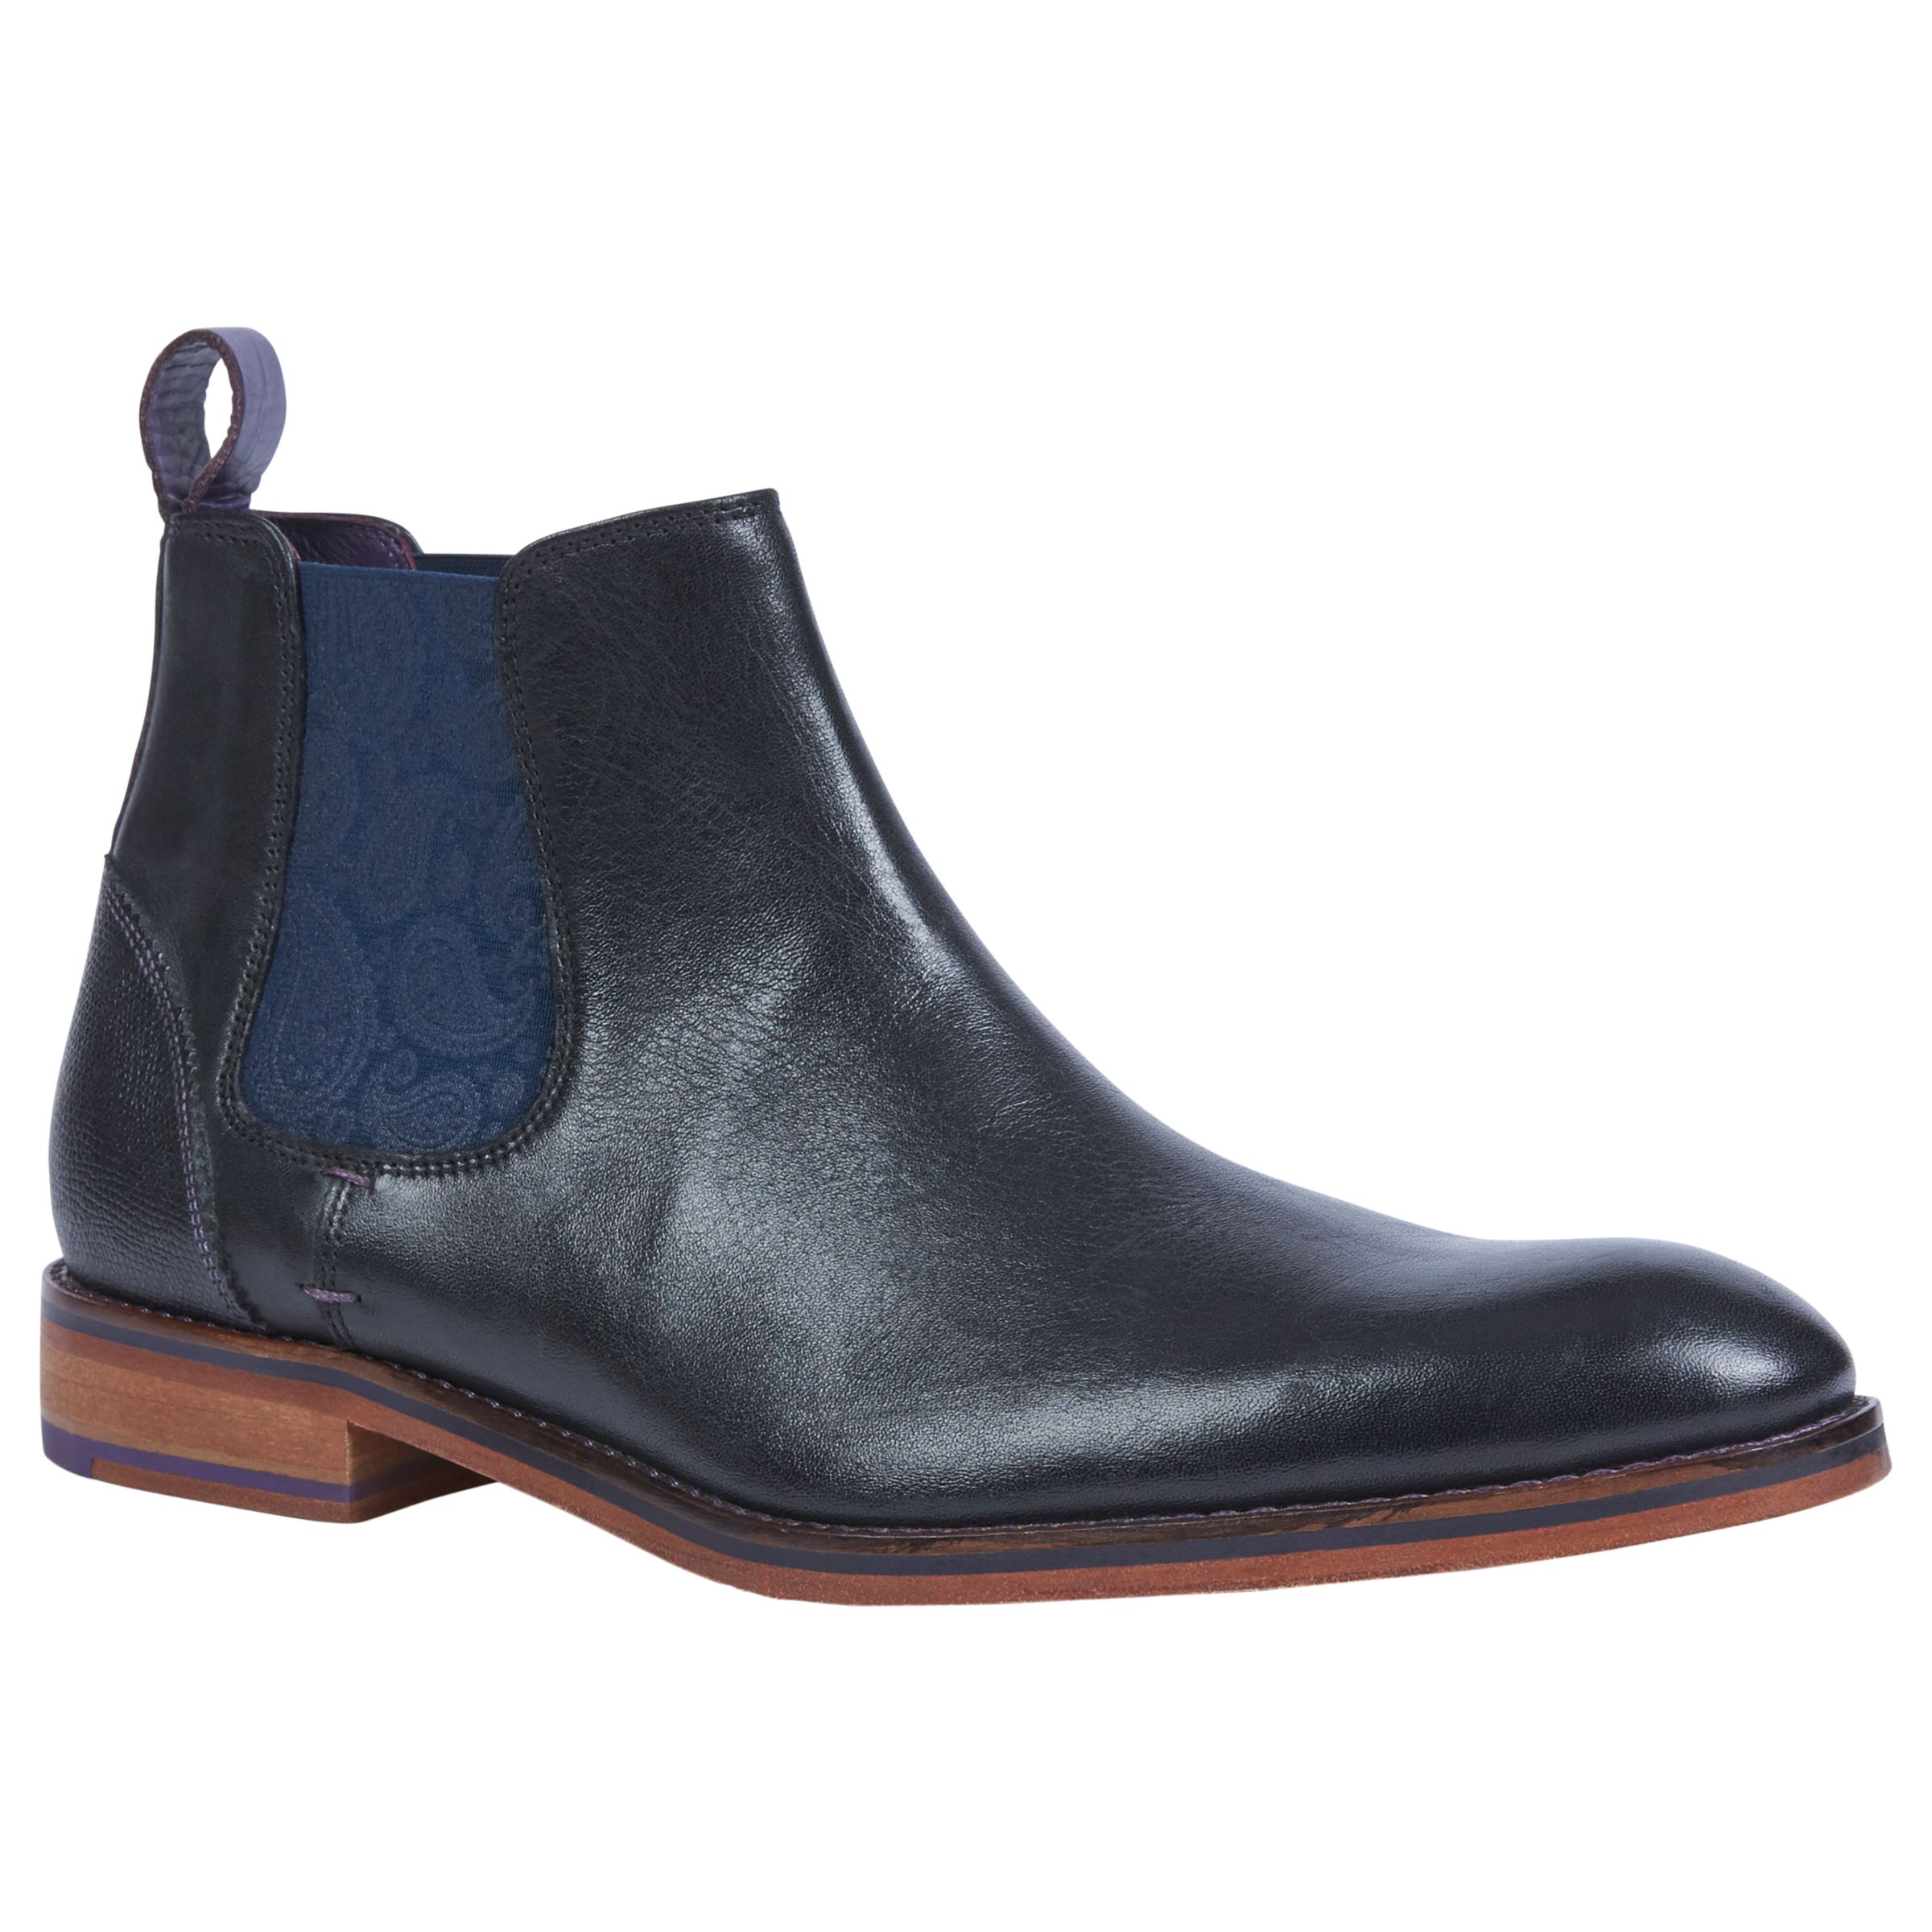 Ted Baker Camroon Paisley Detail Leather Chelsea Boots, Black